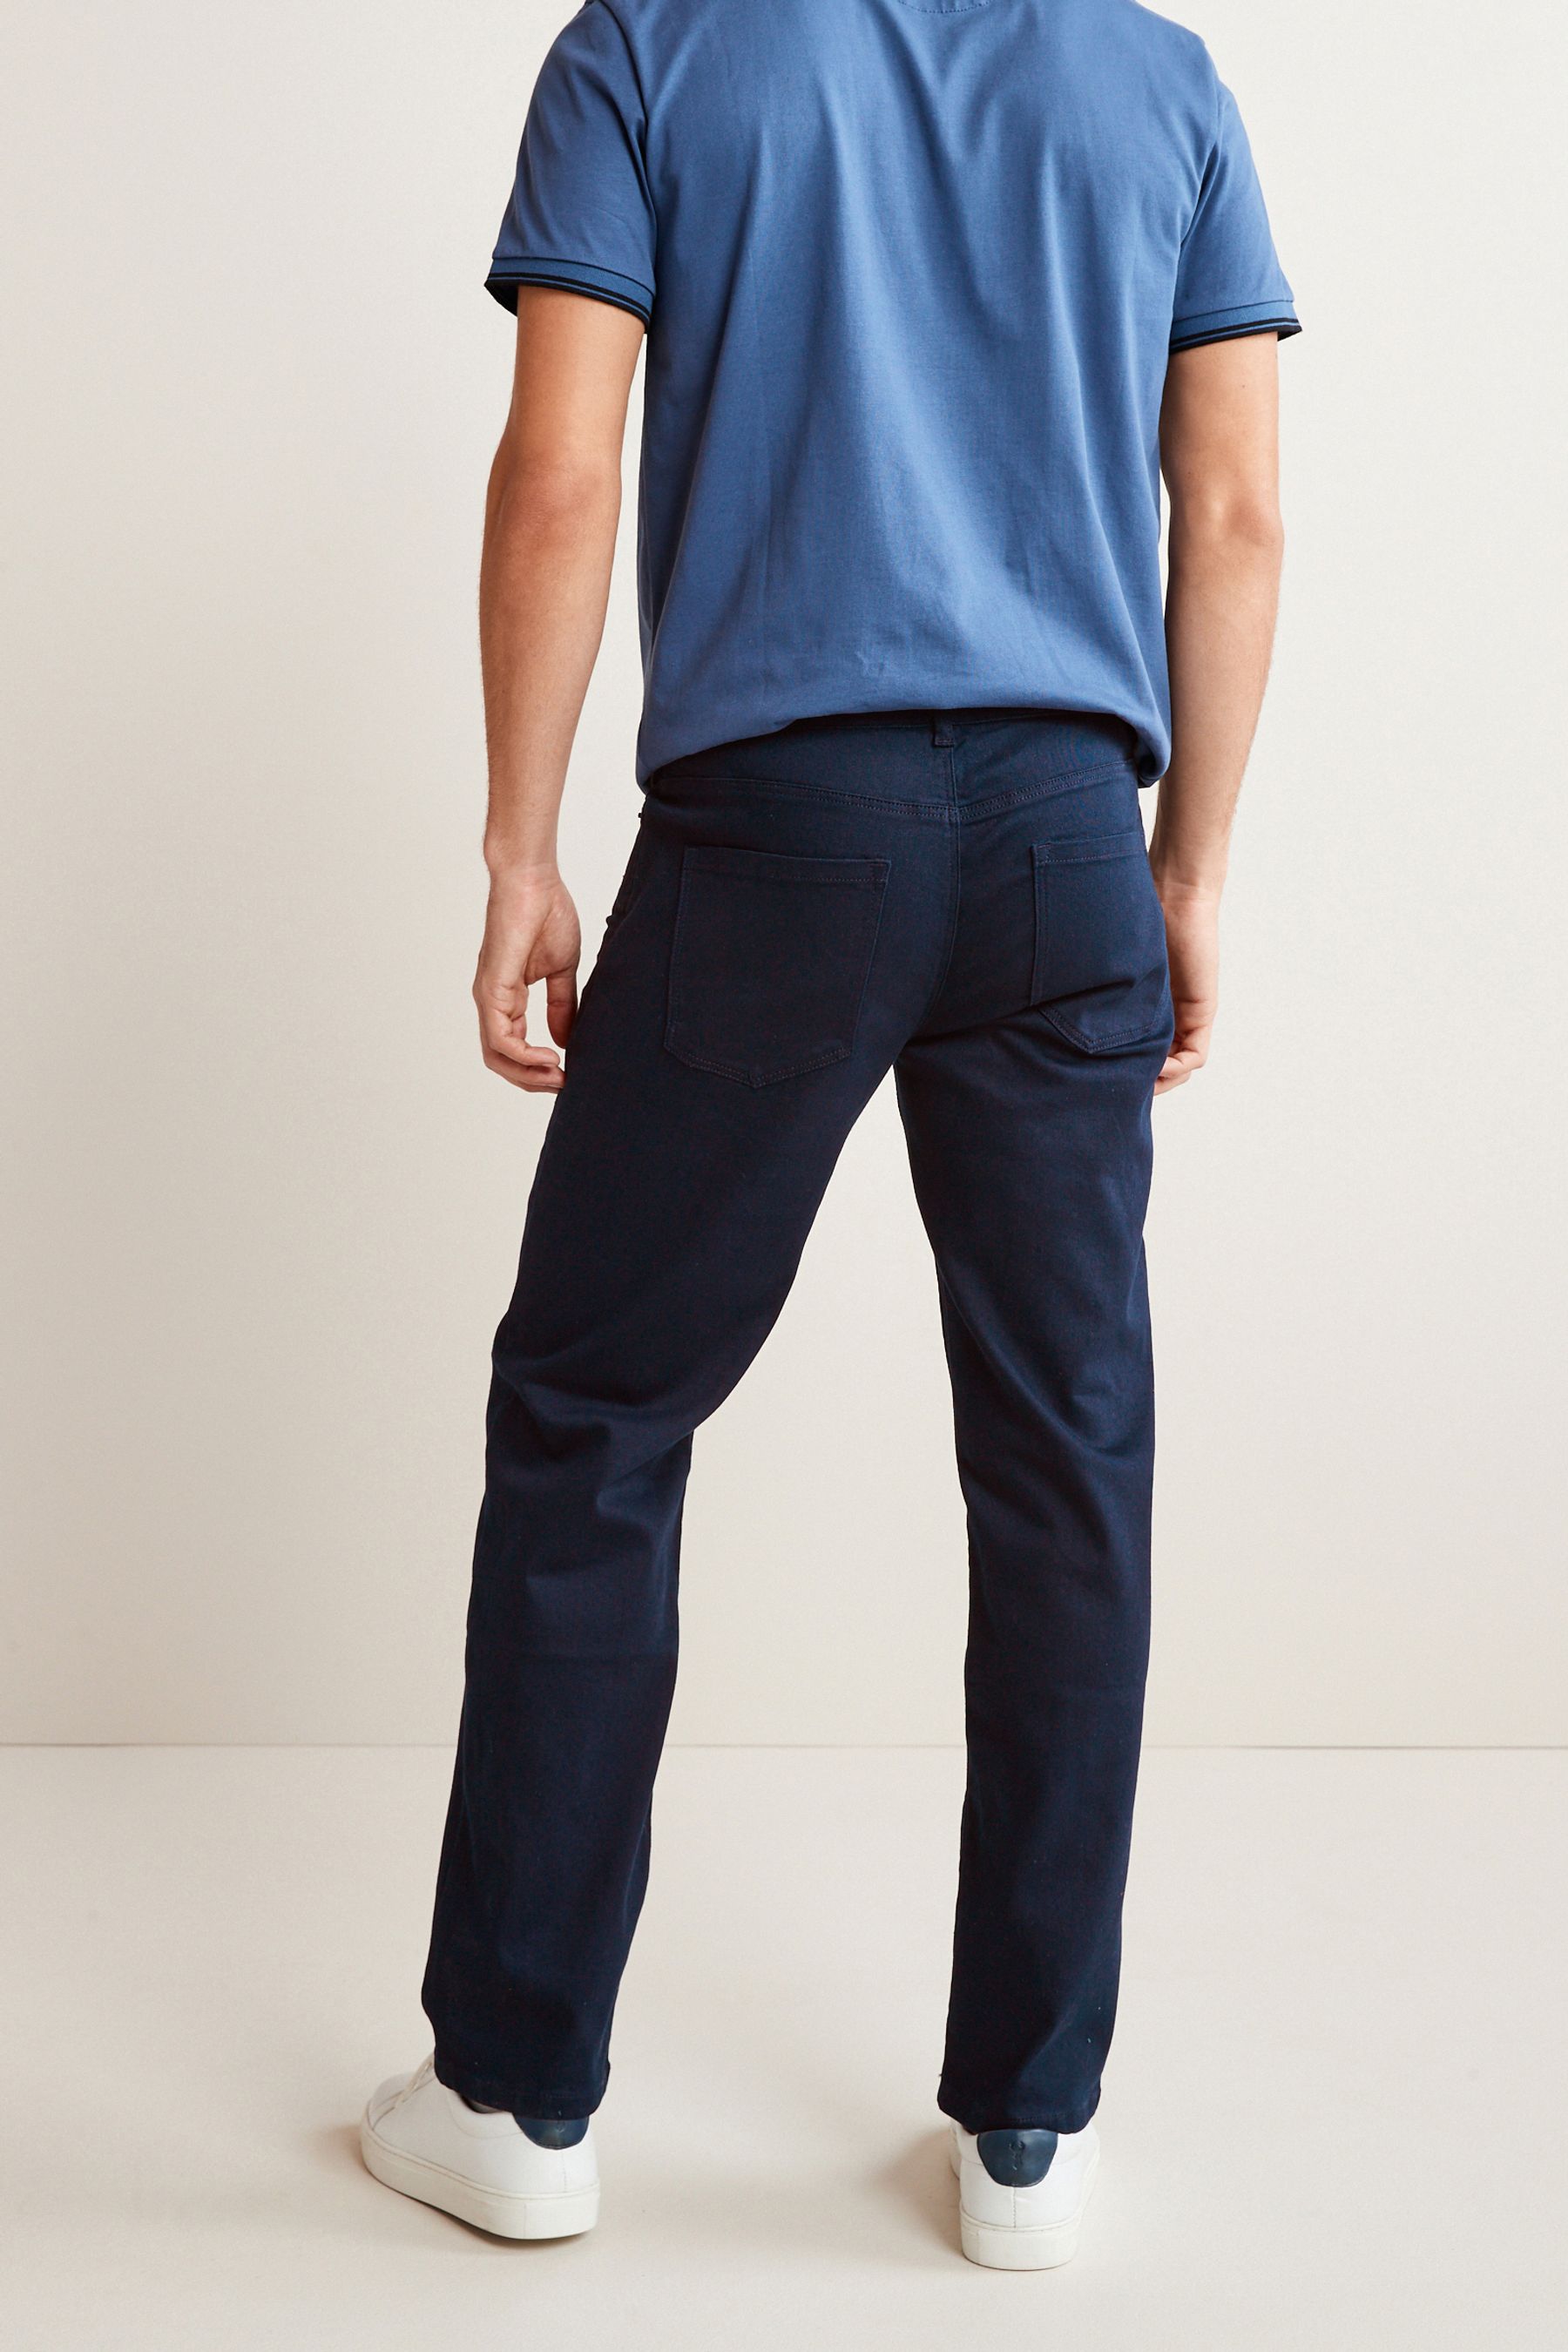 U25454s Relaxed Fit